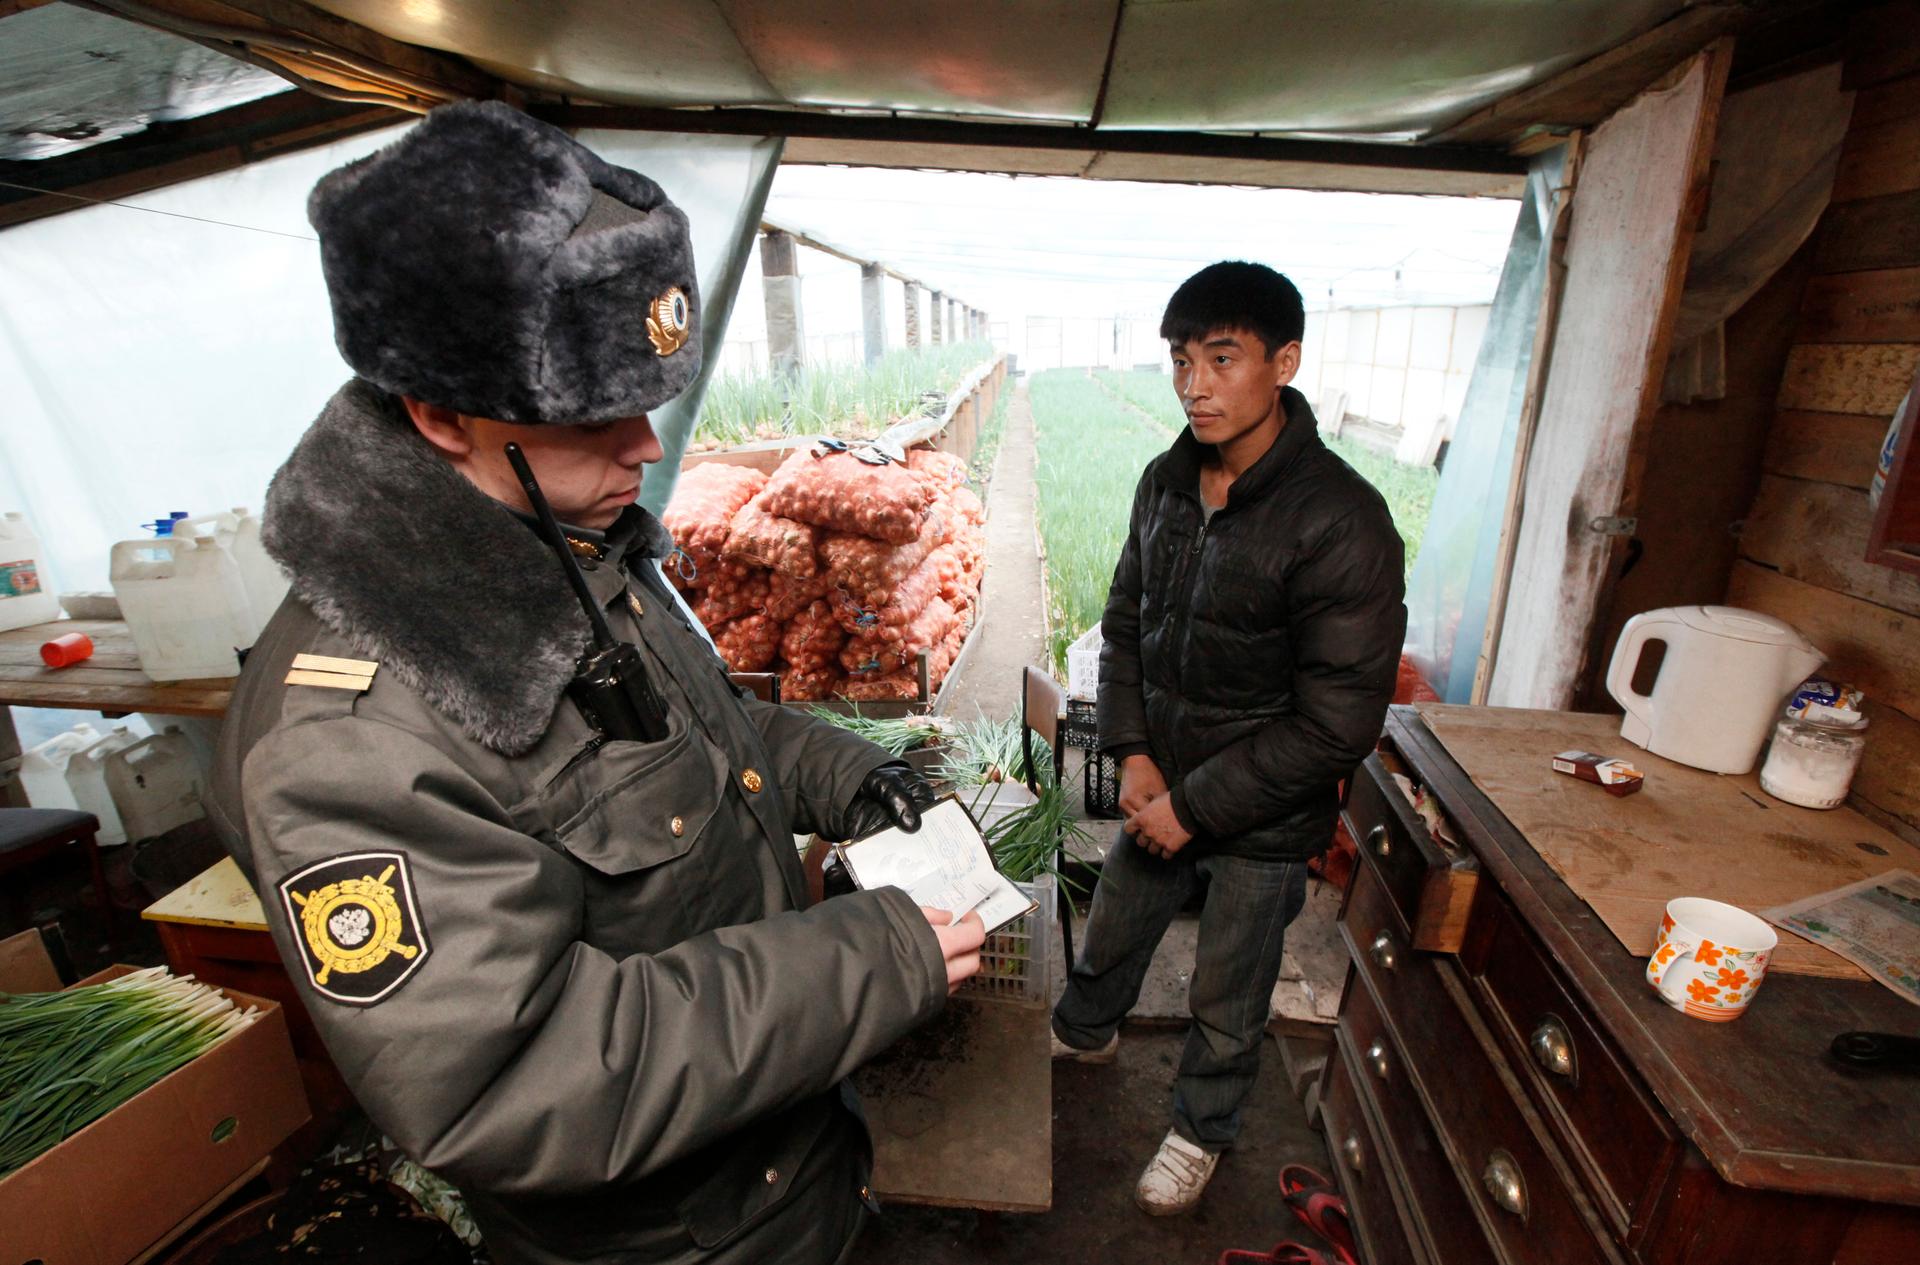 A Russian police officer checks the documents of a Kyrgyz migrant worker at a greenhouse on an agrarian farm during a raid conducted by the police and members of the federal migratory service. April 8, 2012.